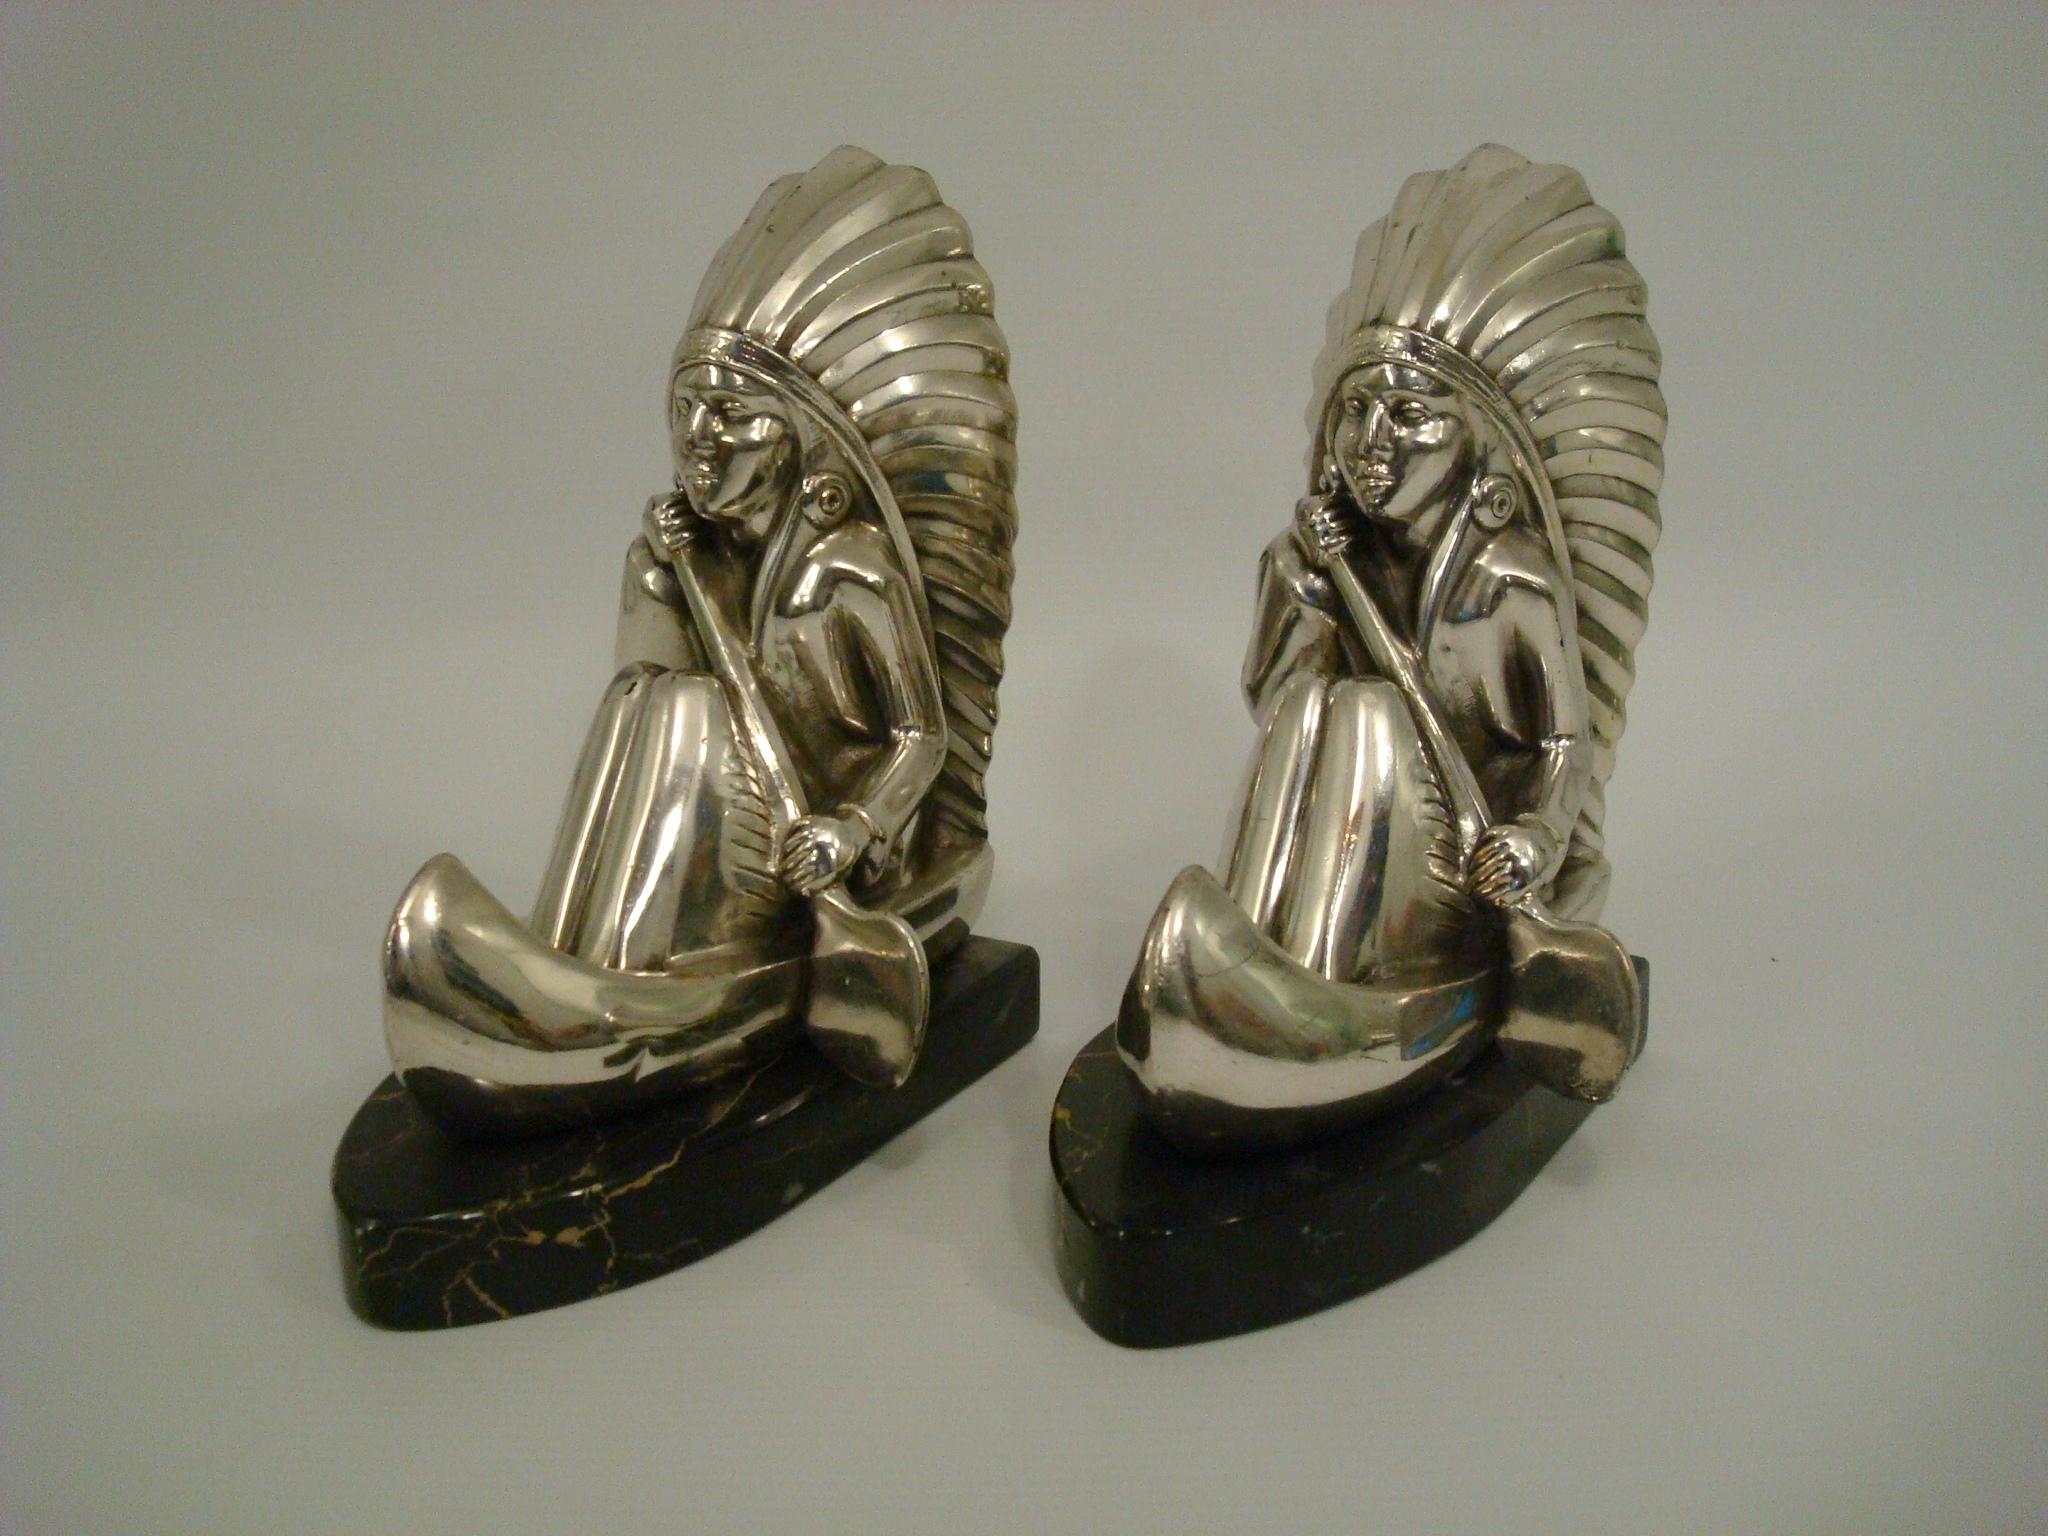 Art Deco silvered metal natives rowing bookends.
In the style of Noel Coulon, French artist.
A pair of art deco silvered metal bookends, mounted over black and gold italian marble bases.
 